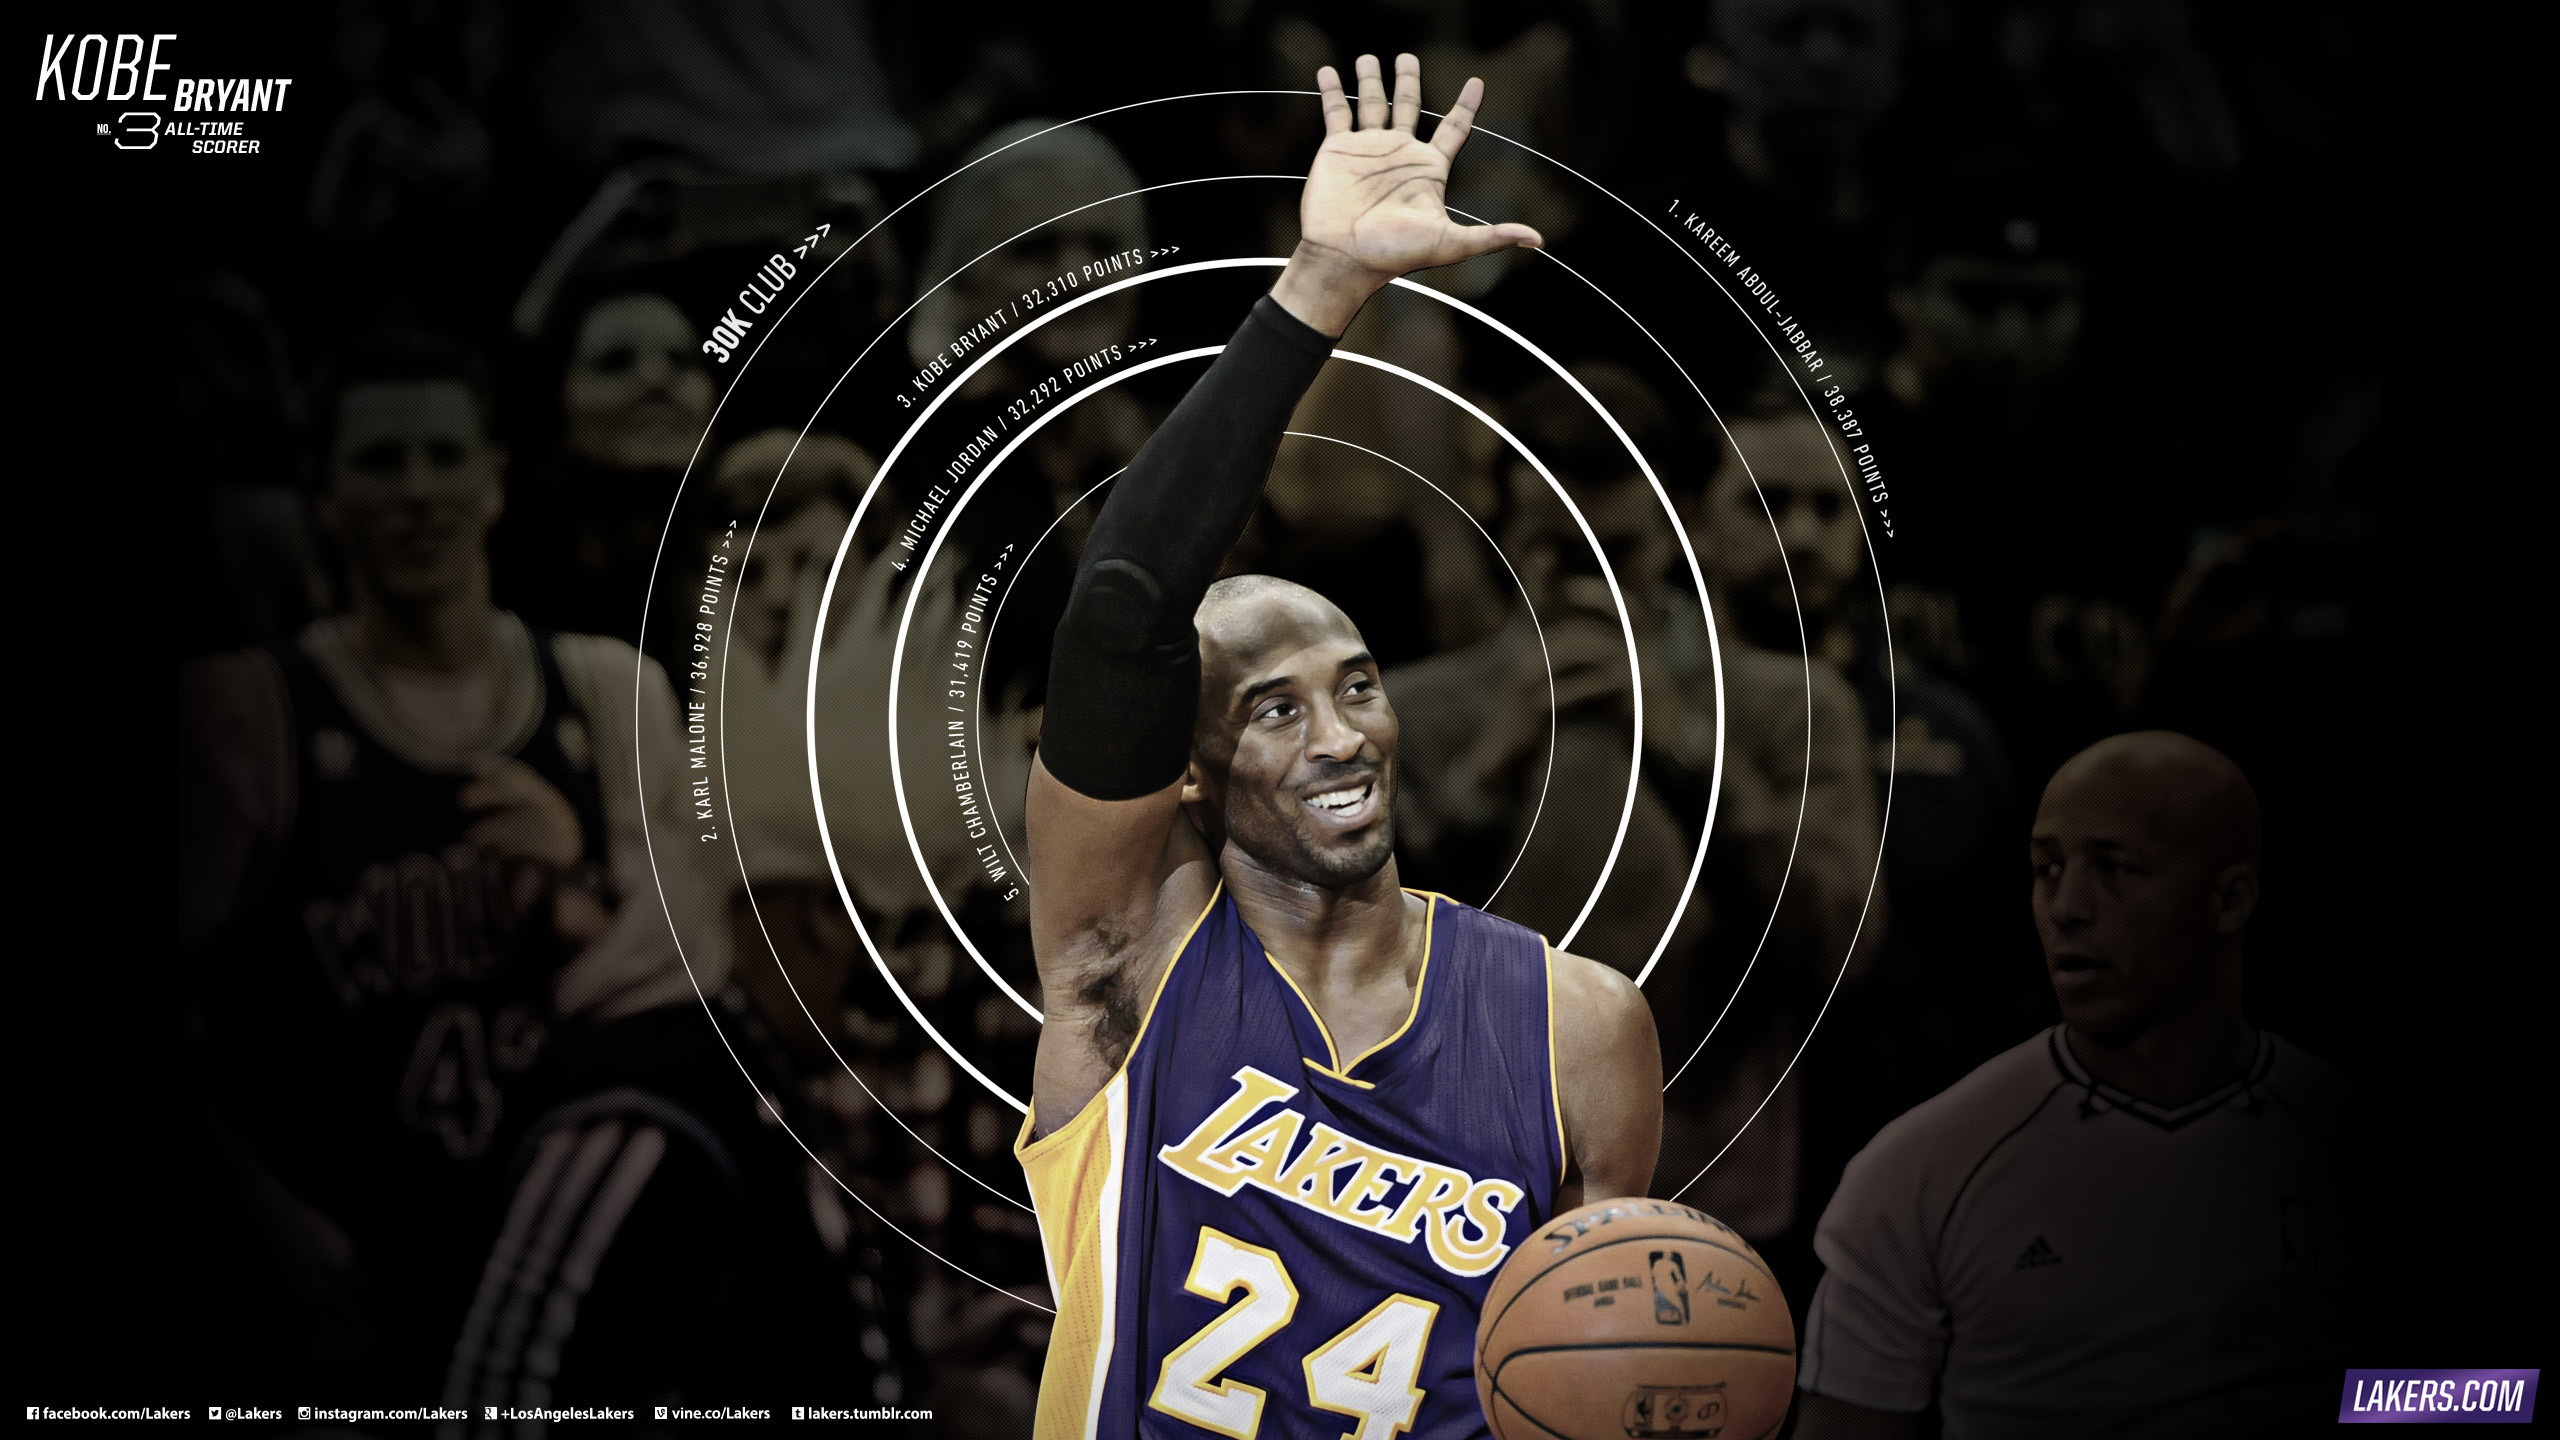 Cool background kobe bryant HD wallpapers